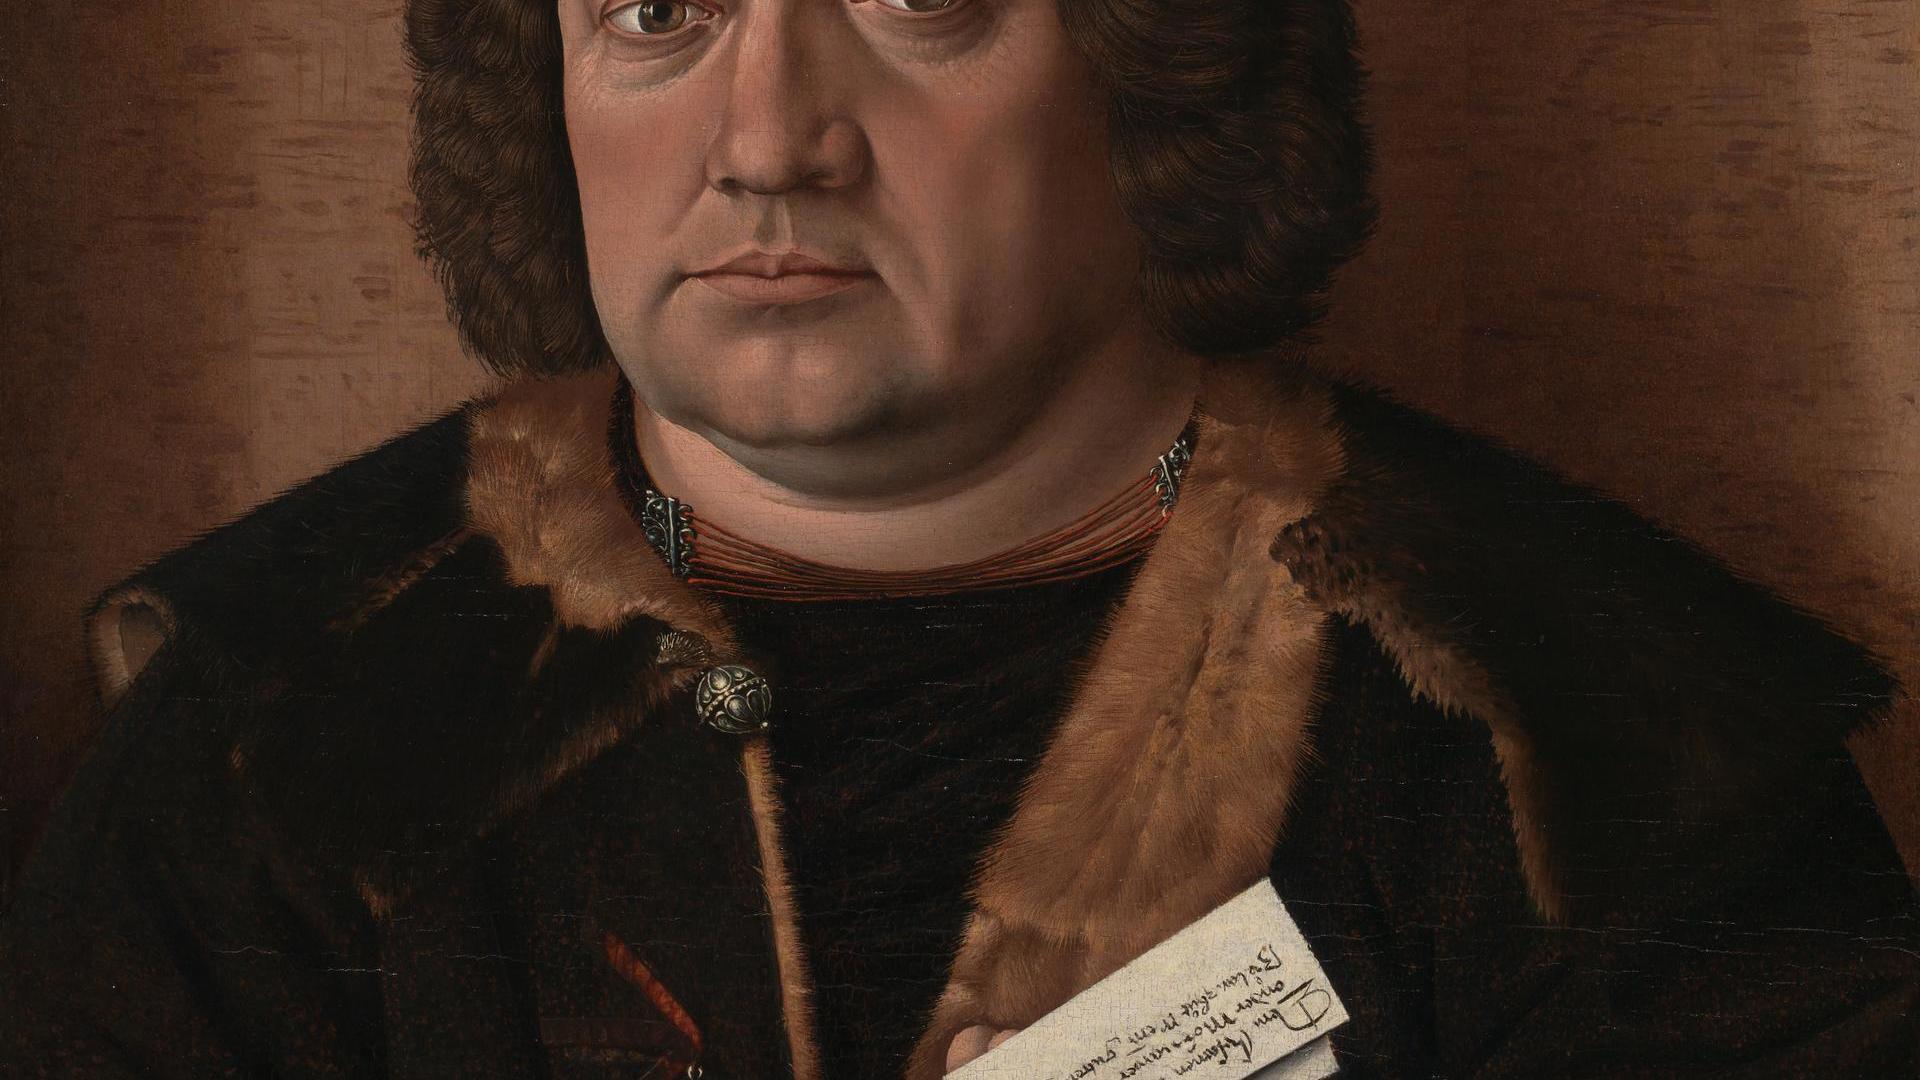 Portrait of Alexander Mornauer by Master of the Mornauer Portrait